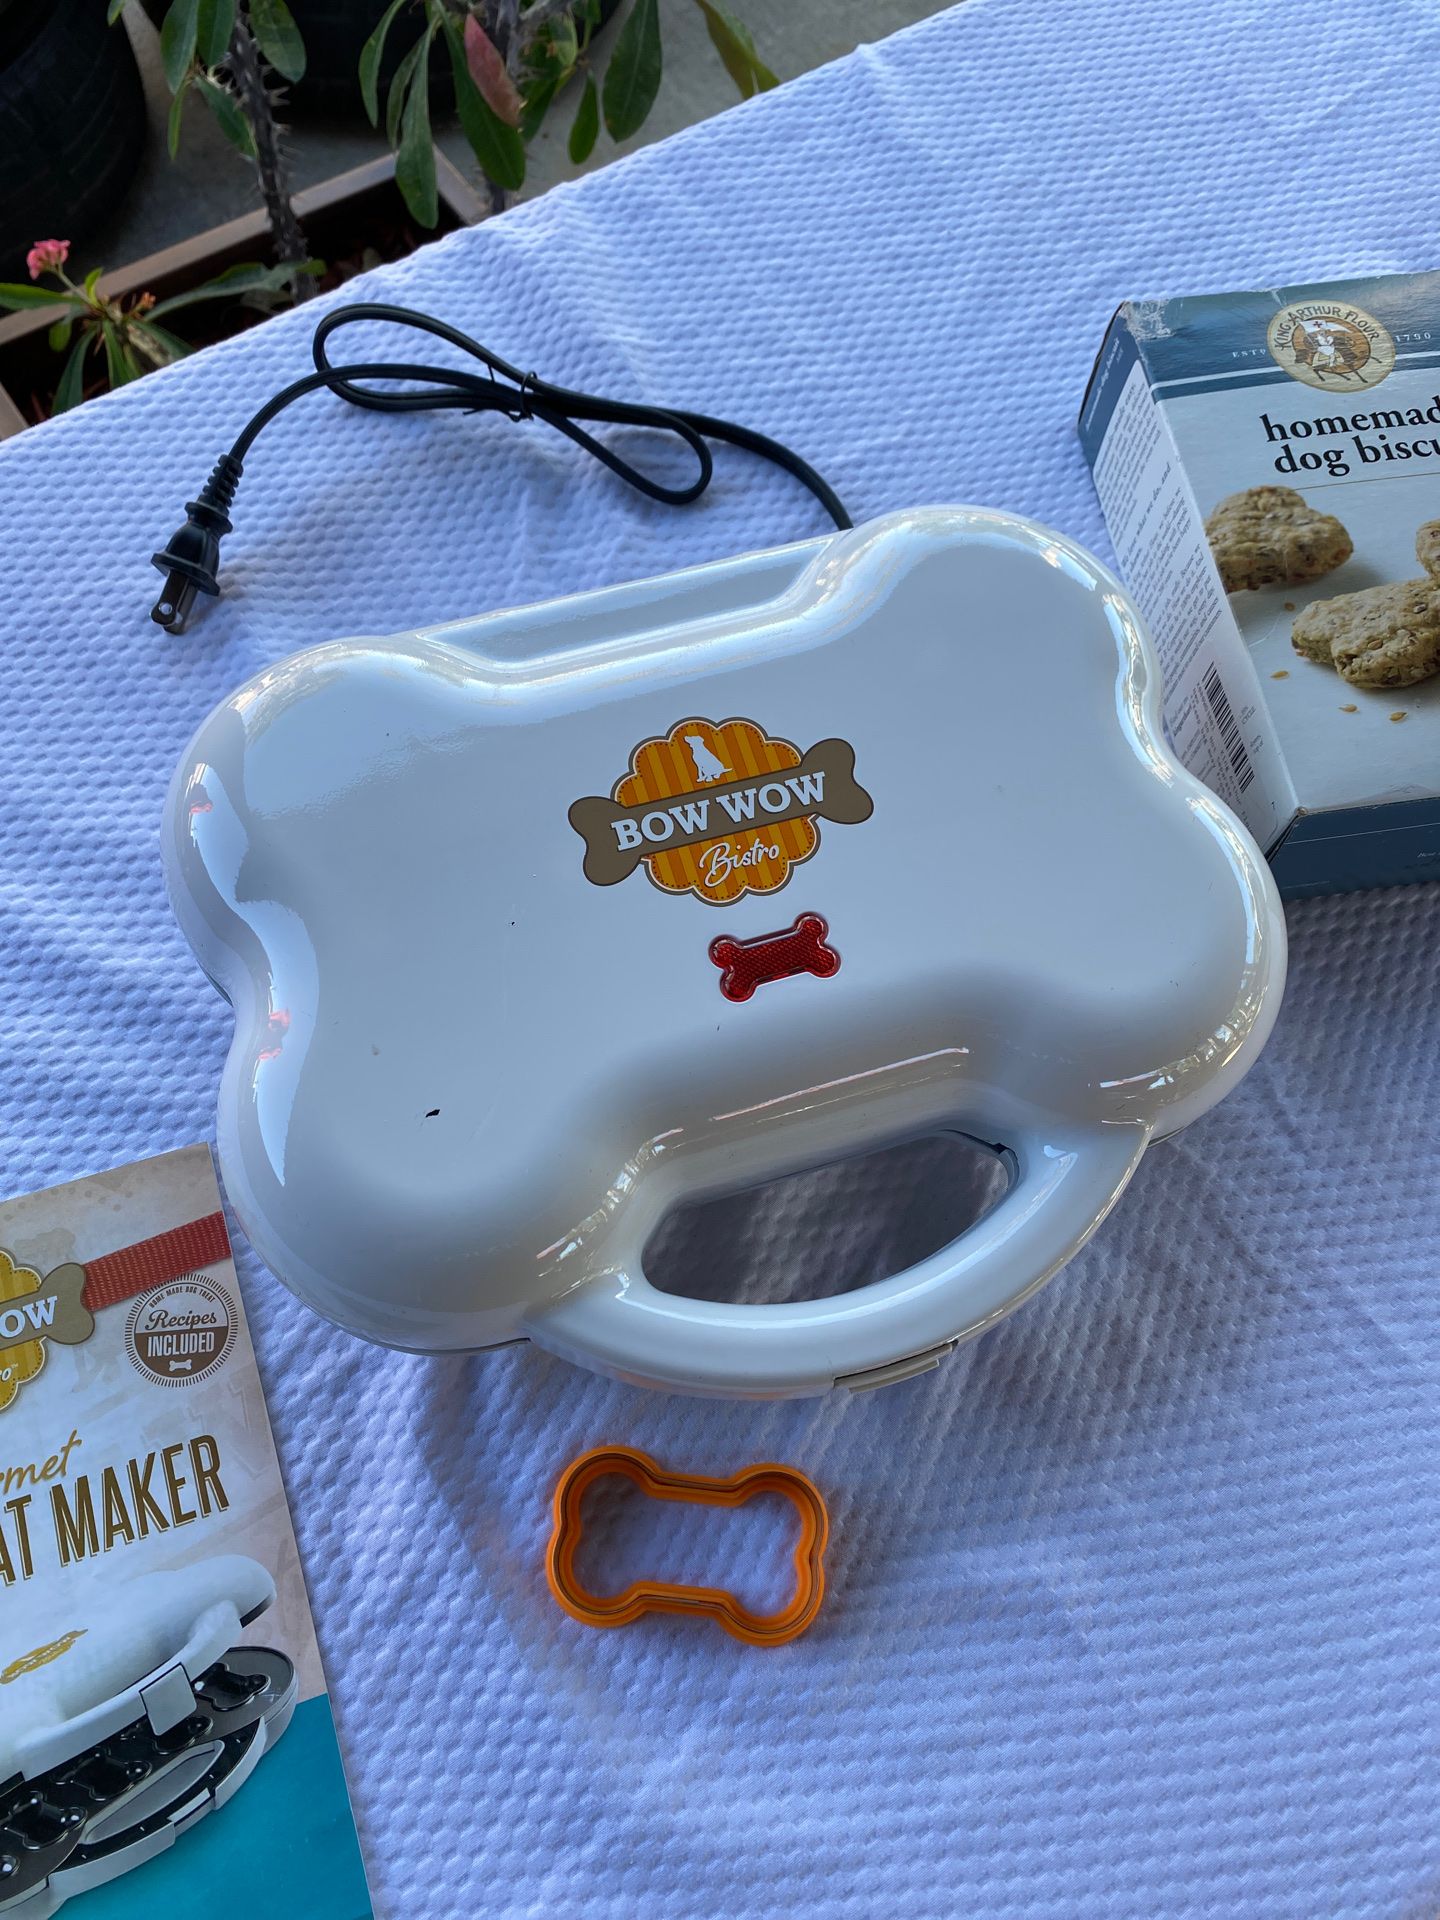 Dog Treat Maker for Sale in City Of Industry, CA - OfferUp